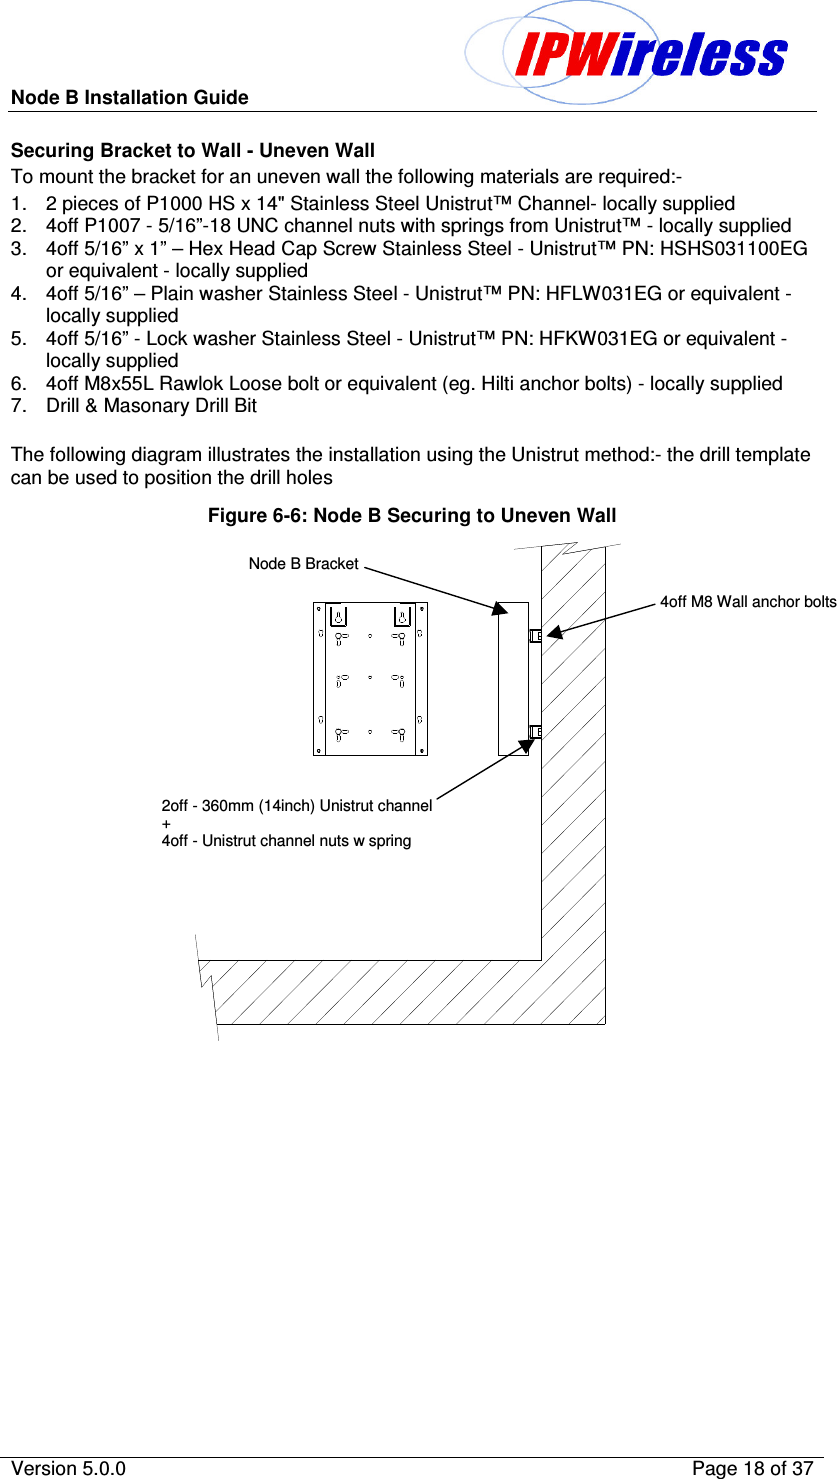 Node B Installation Guide                                              Version 5.0.0    Page 18 of 37  Securing Bracket to Wall - Uneven Wall To mount the bracket for an uneven wall the following materials are required:- 1.  2 pieces of P1000 HS x 14&quot; Stainless Steel Unistrut™ Channel- locally supplied  2.  4off P1007 - 5/16”-18 UNC channel nuts with springs from Unistrut™ - locally supplied  3.  4off 5/16” x 1” – Hex Head Cap Screw Stainless Steel - Unistrut™ PN: HSHS031100EG or equivalent - locally supplied 4.  4off 5/16” – Plain washer Stainless Steel - Unistrut™ PN: HFLW031EG or equivalent - locally supplied 5.  4off 5/16” - Lock washer Stainless Steel - Unistrut™ PN: HFKW031EG or equivalent - locally supplied 6.  4off M8x55L Rawlok Loose bolt or equivalent (eg. Hilti anchor bolts) - locally supplied  7.  Drill &amp; Masonary Drill Bit  The following diagram illustrates the installation using the Unistrut method:- the drill template can be used to position the drill holes Figure 6-6: Node B Securing to Uneven Wall  4off M8 Wall anchor bolts  2off - 360mm (14inch) Unistrut channel + 4off - Unistrut channel nuts w spring   Node B Bracket  